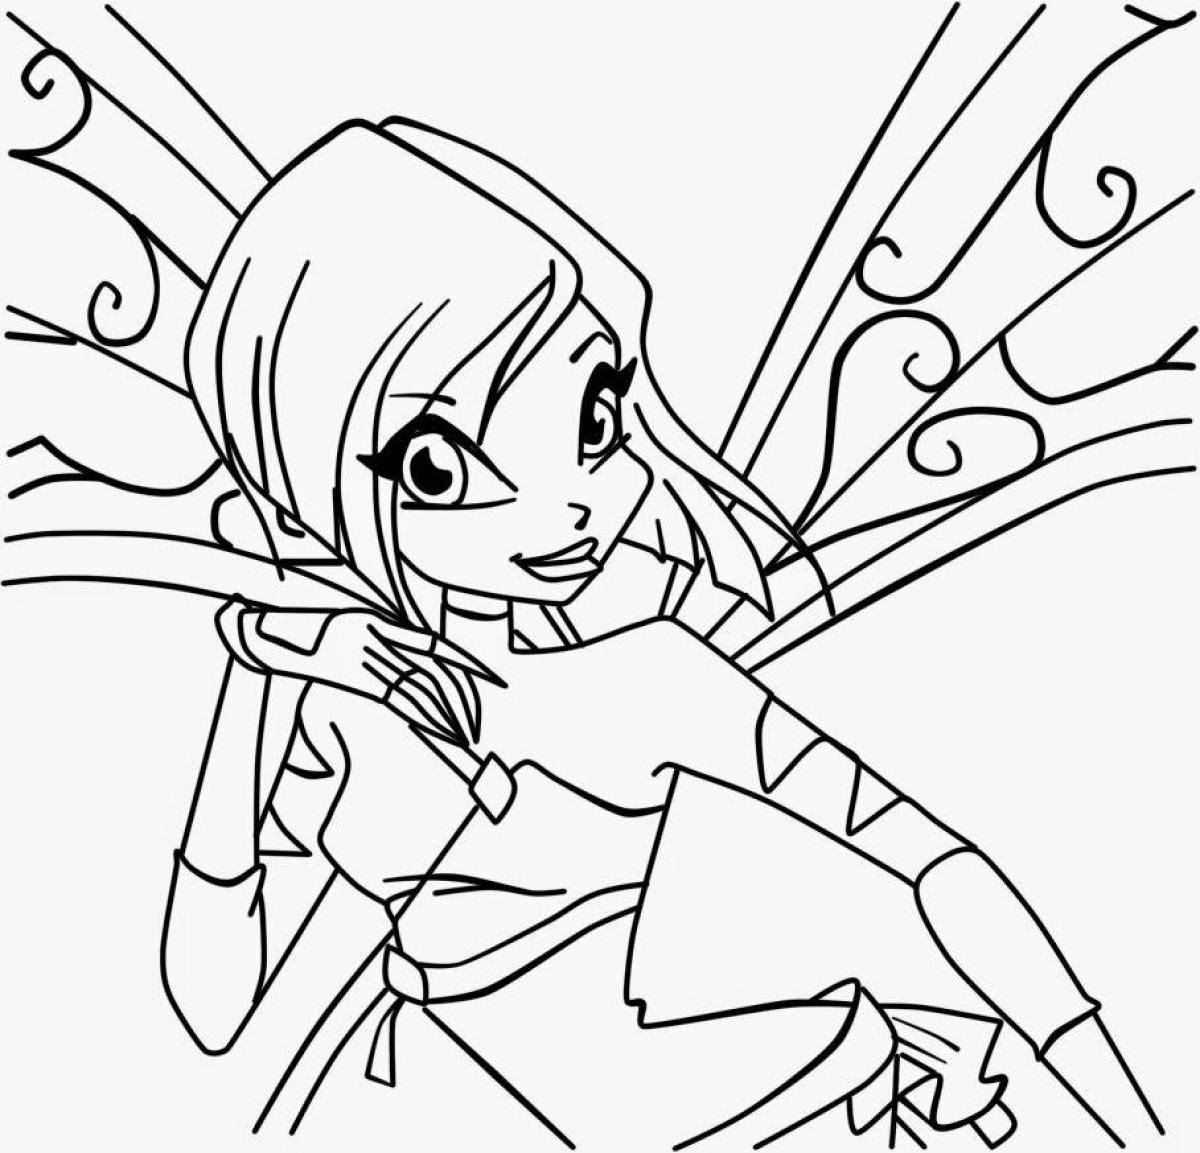 Colorful winx girls coloring book